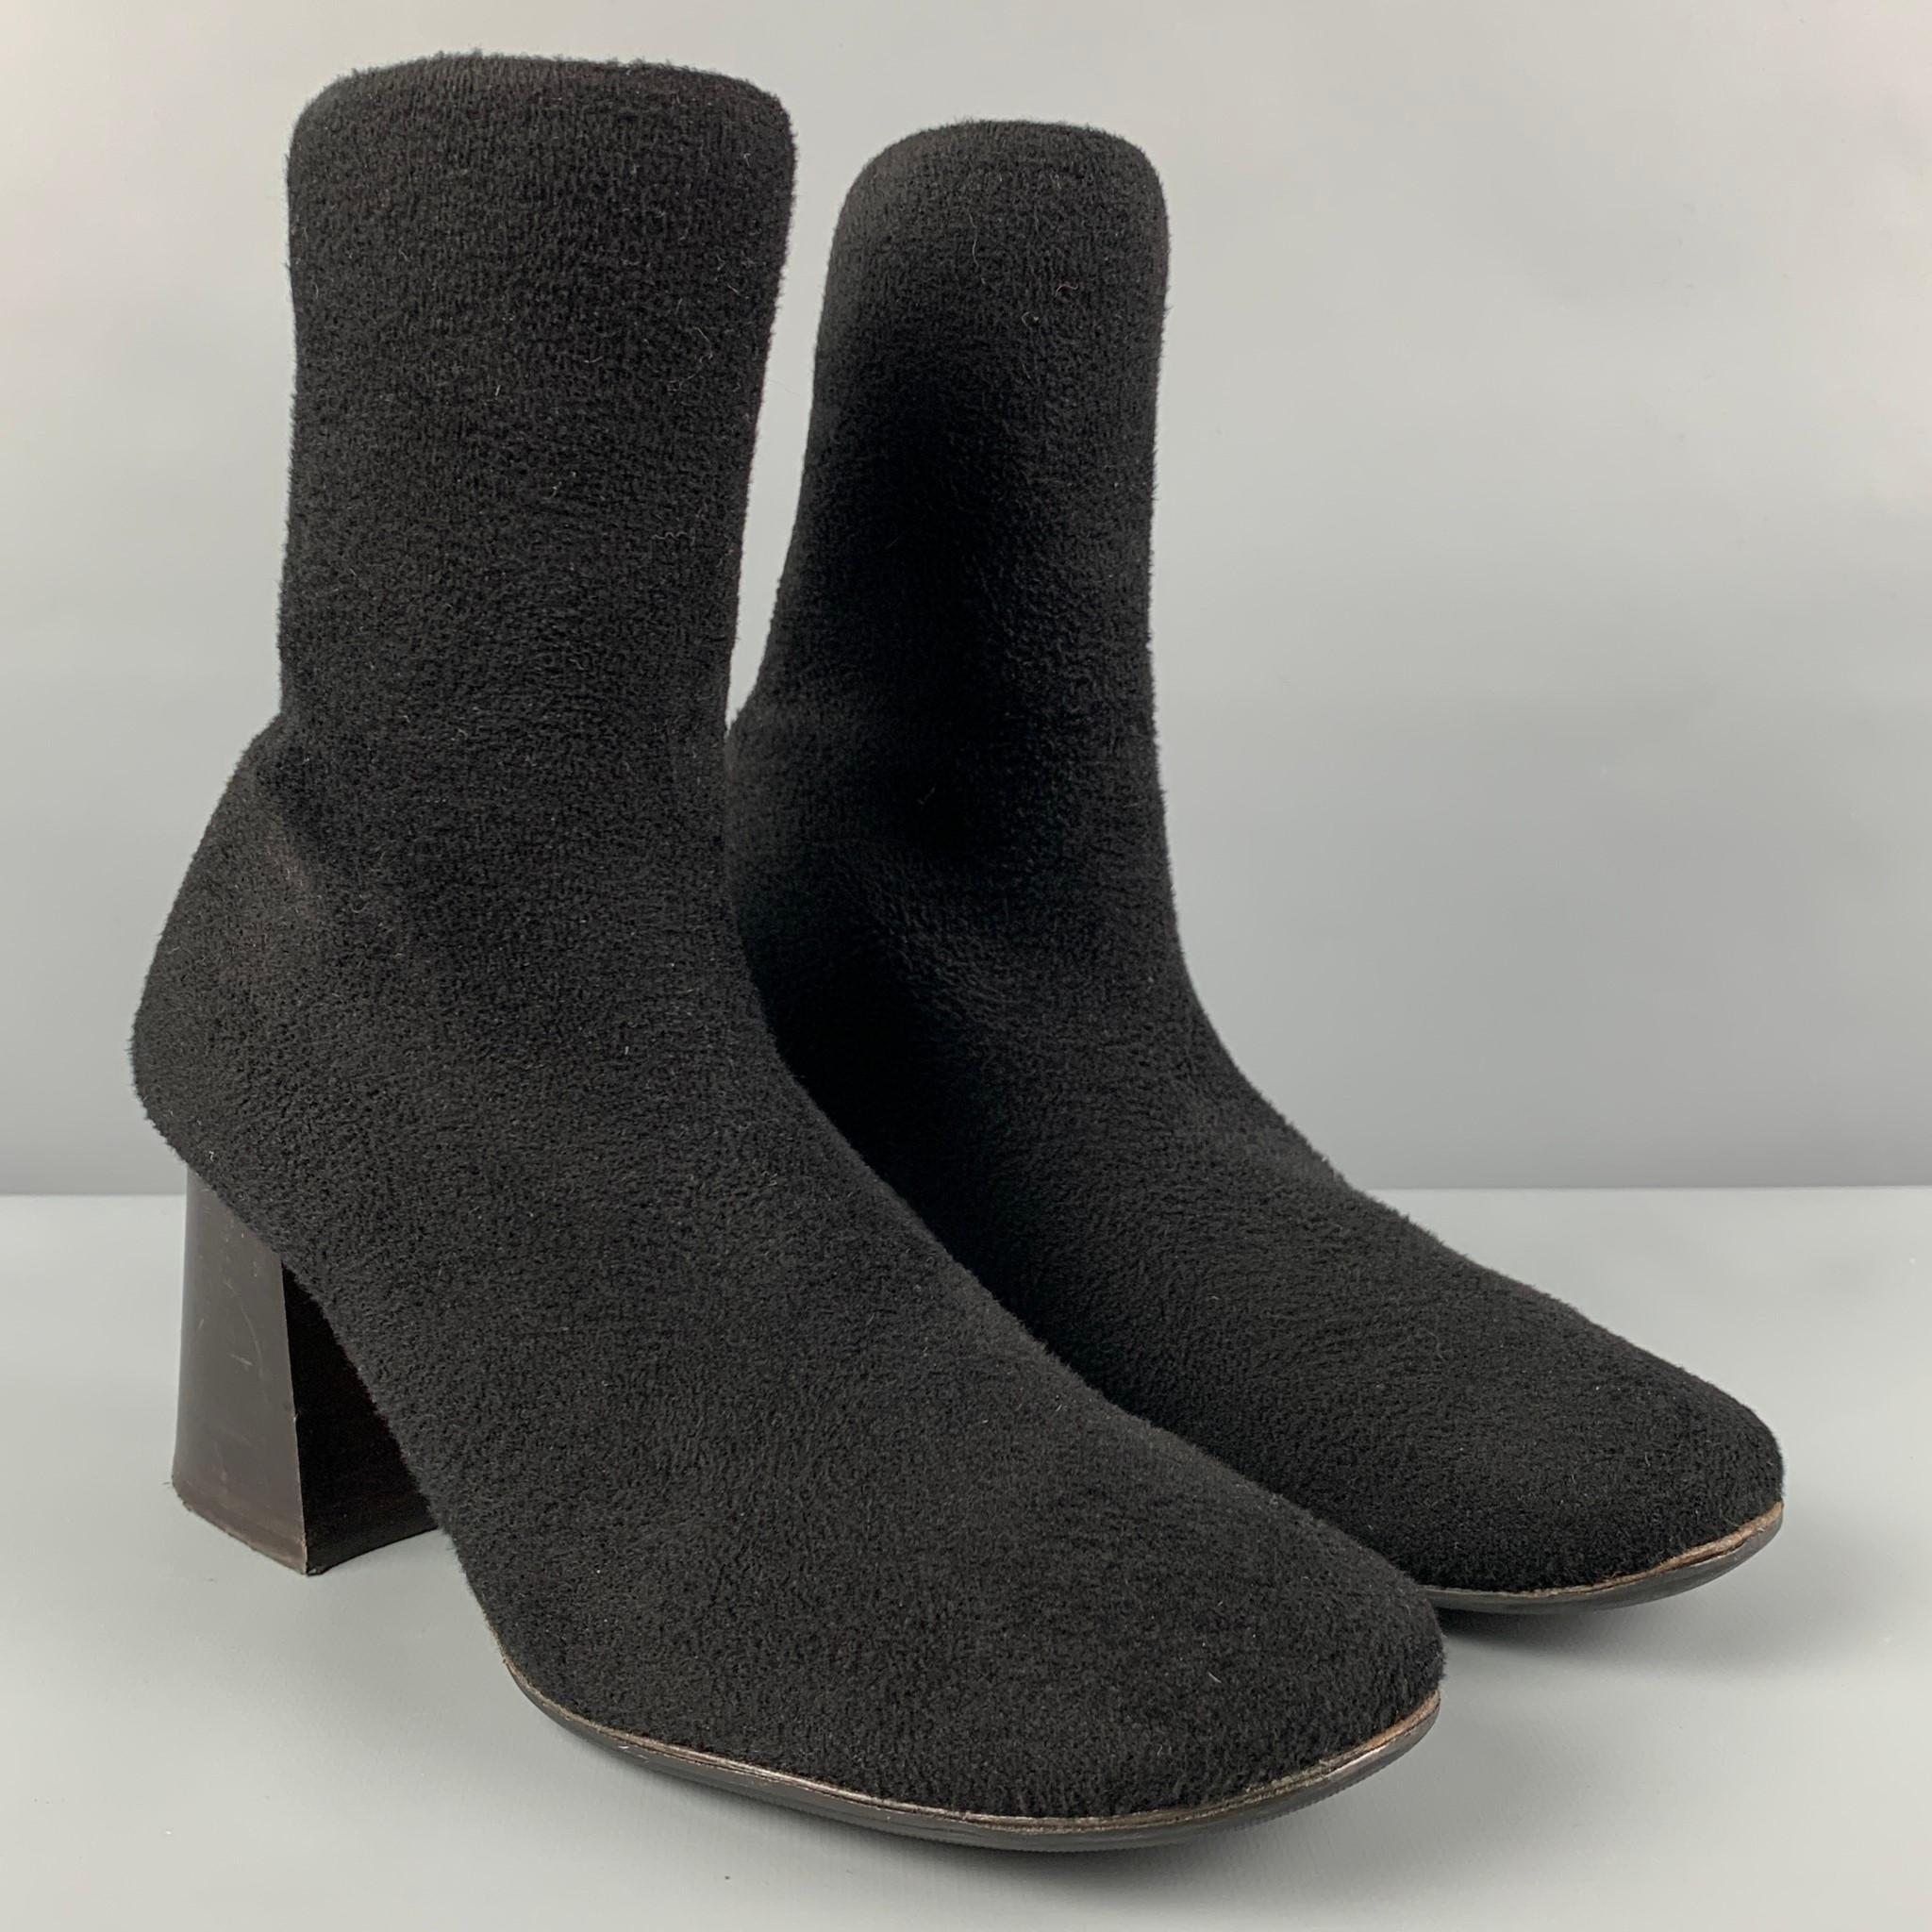 CELINE boots comes in a black textured material featuring a pull on style, round toe, and a chunky heel. Made in Italy. 

Very Good Pre-Owned Condition.
Marked: 39
Original Retail Price: $545.00

Measurements:

Length: 10 in.
Width: 3.5 in.
Height: